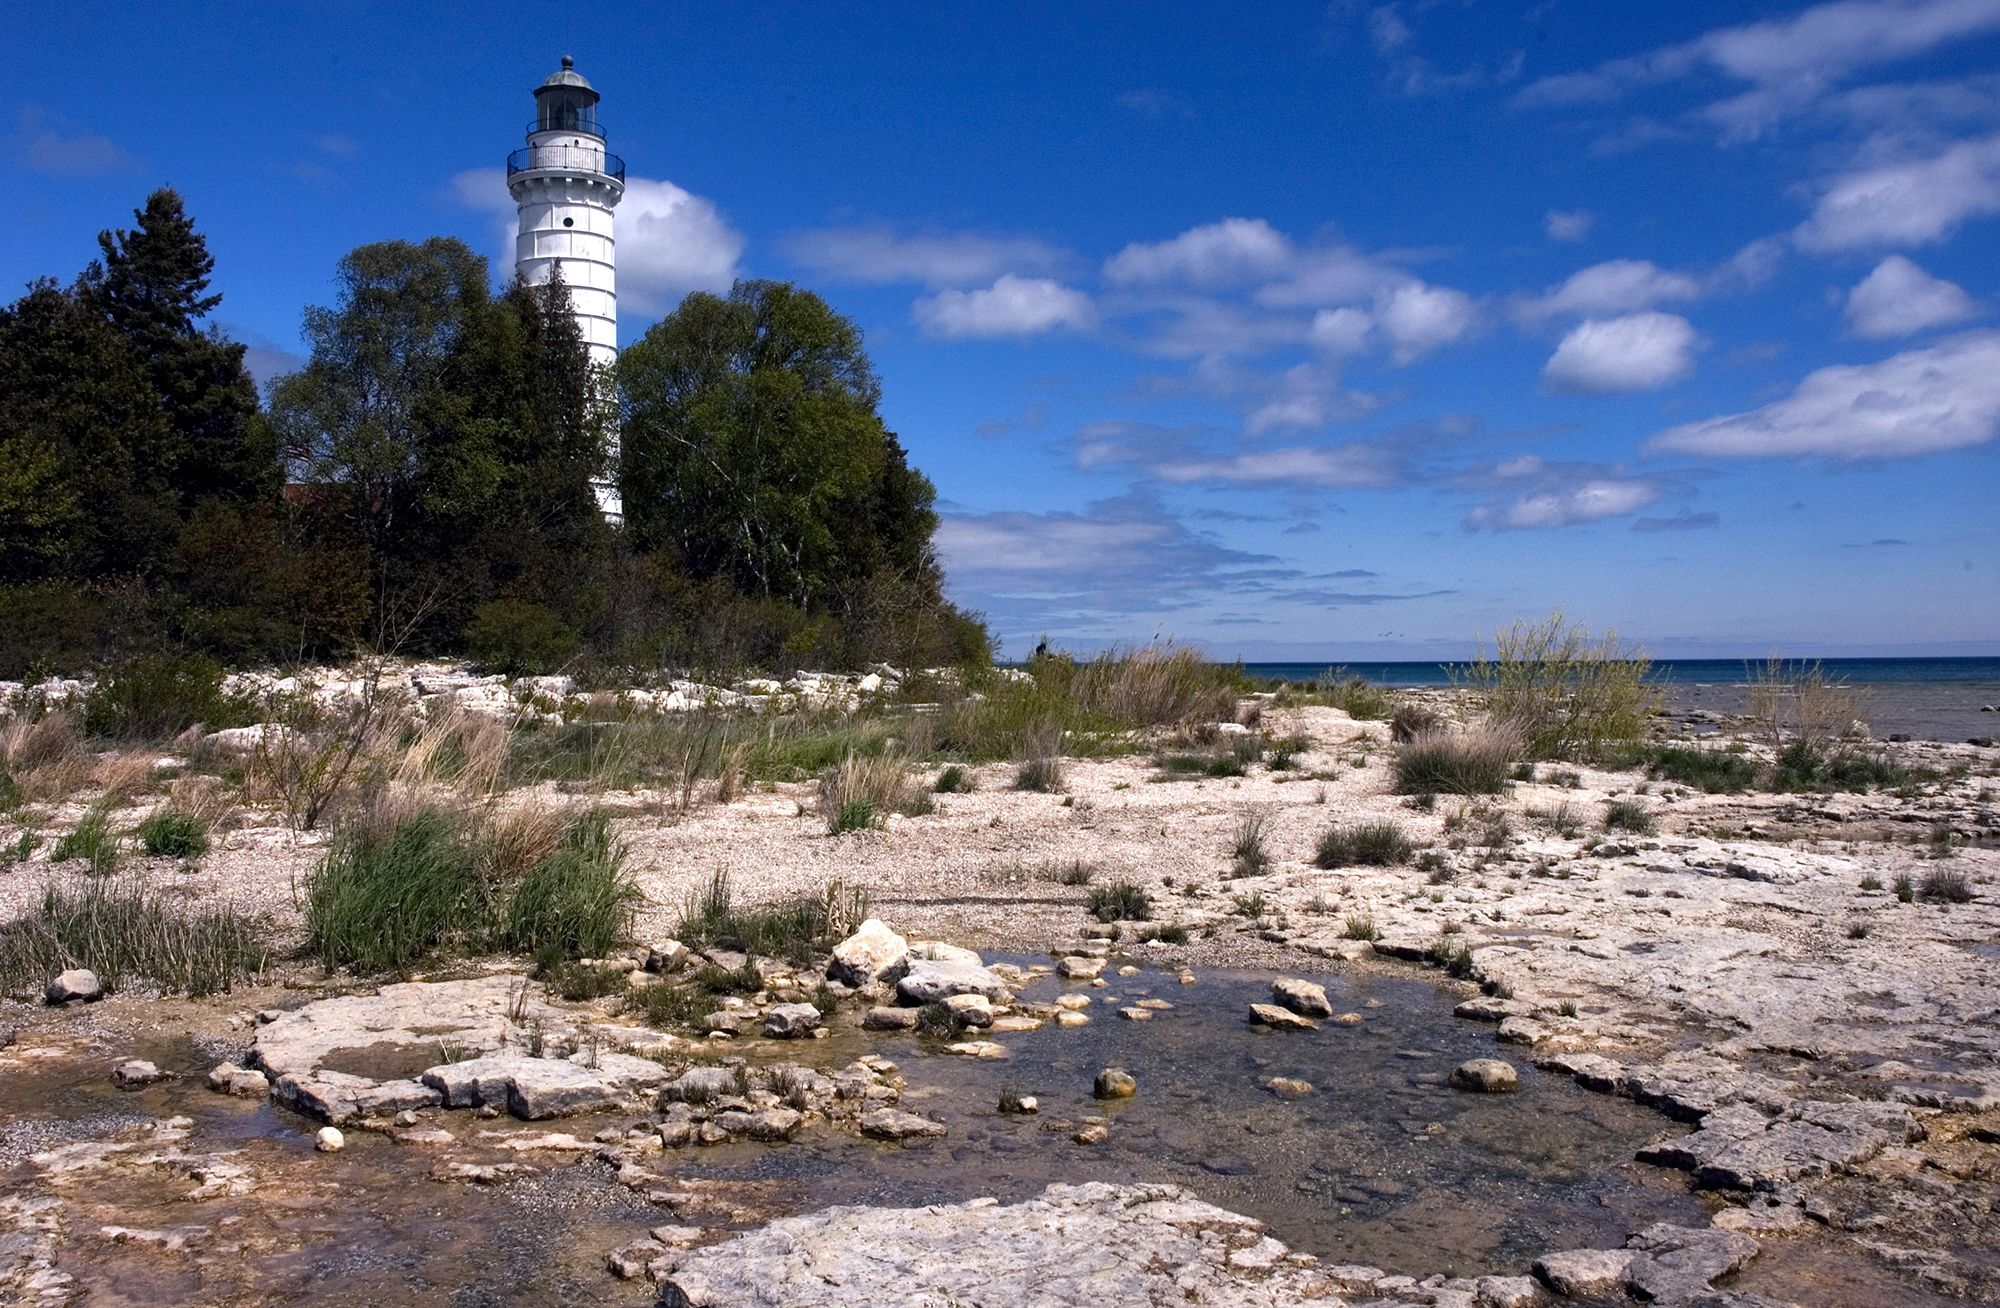 A white lighthouse towers over a rocky shore.